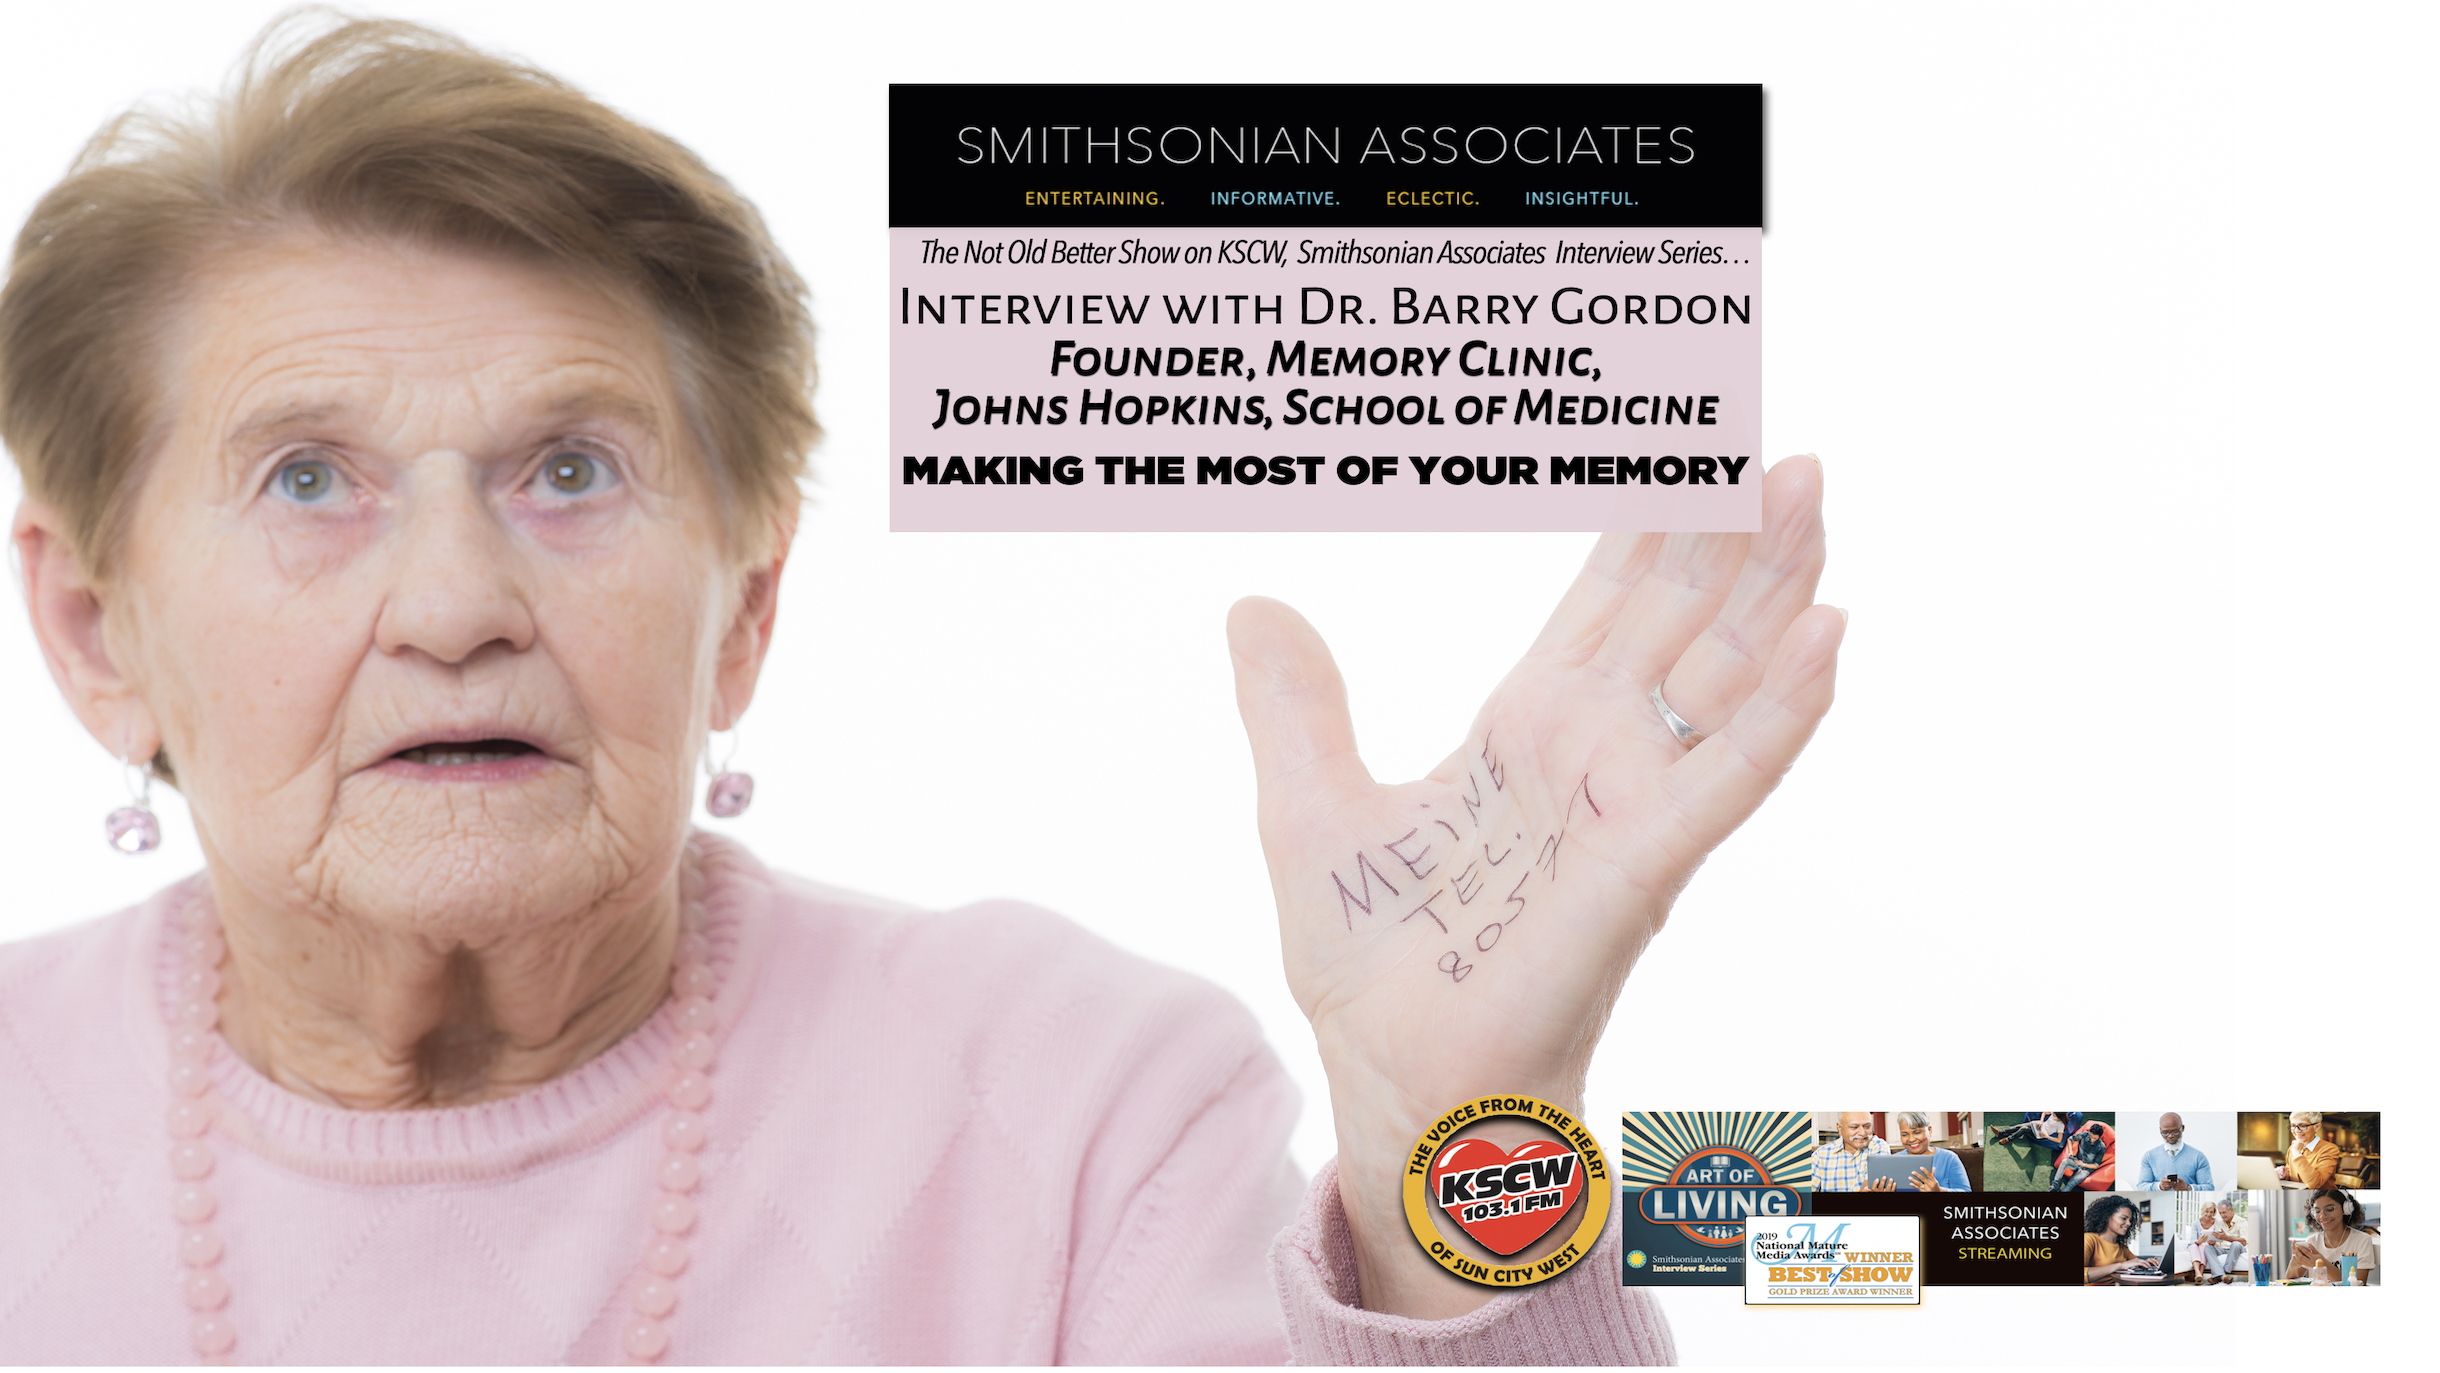 Making The Most of Our Memory – Dr. Barry Gordon